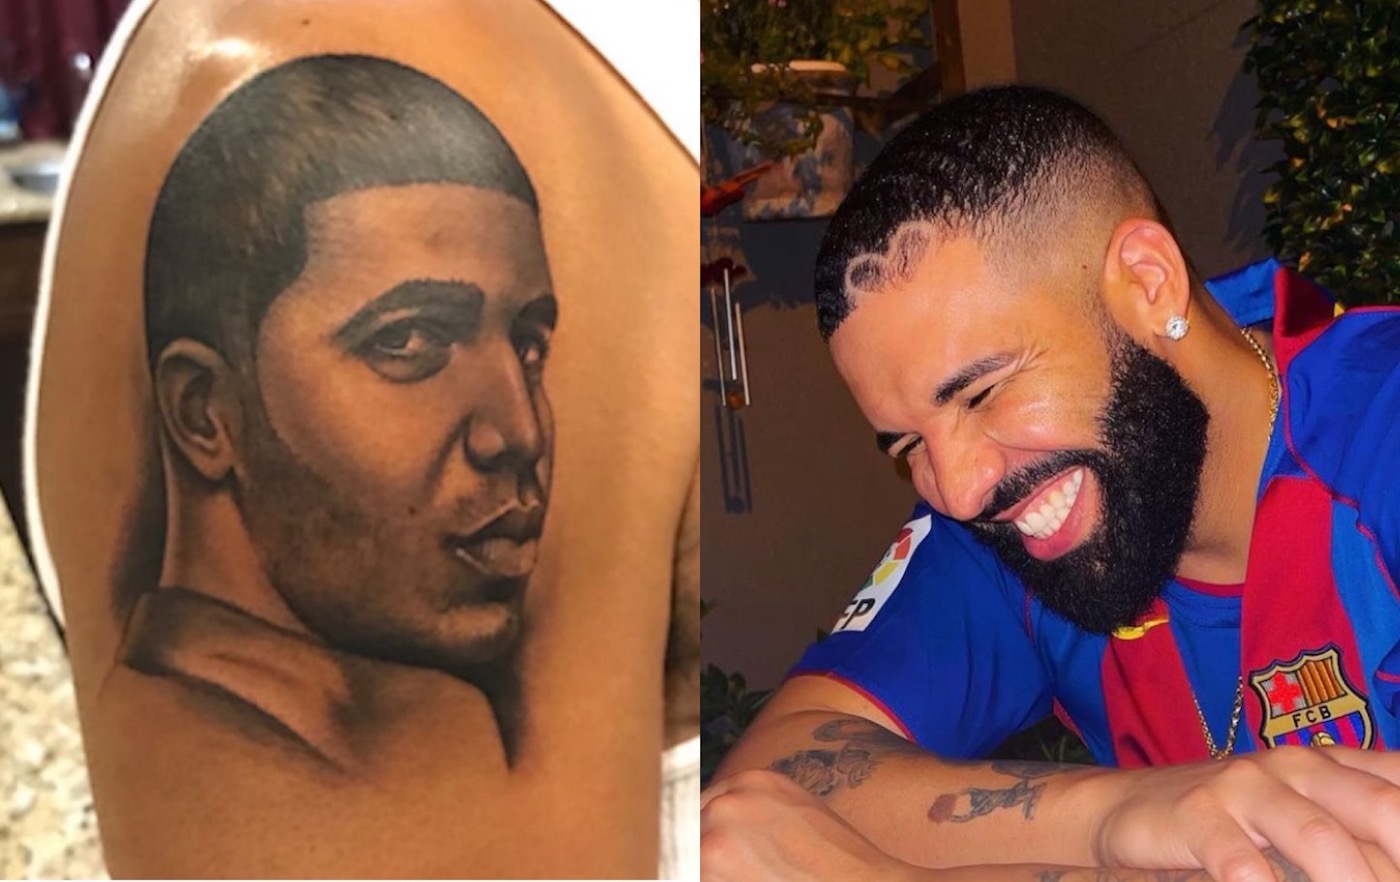 Drakes Face Tattoo Slammed by Fans After Rapper Trolled Dad for His Ink